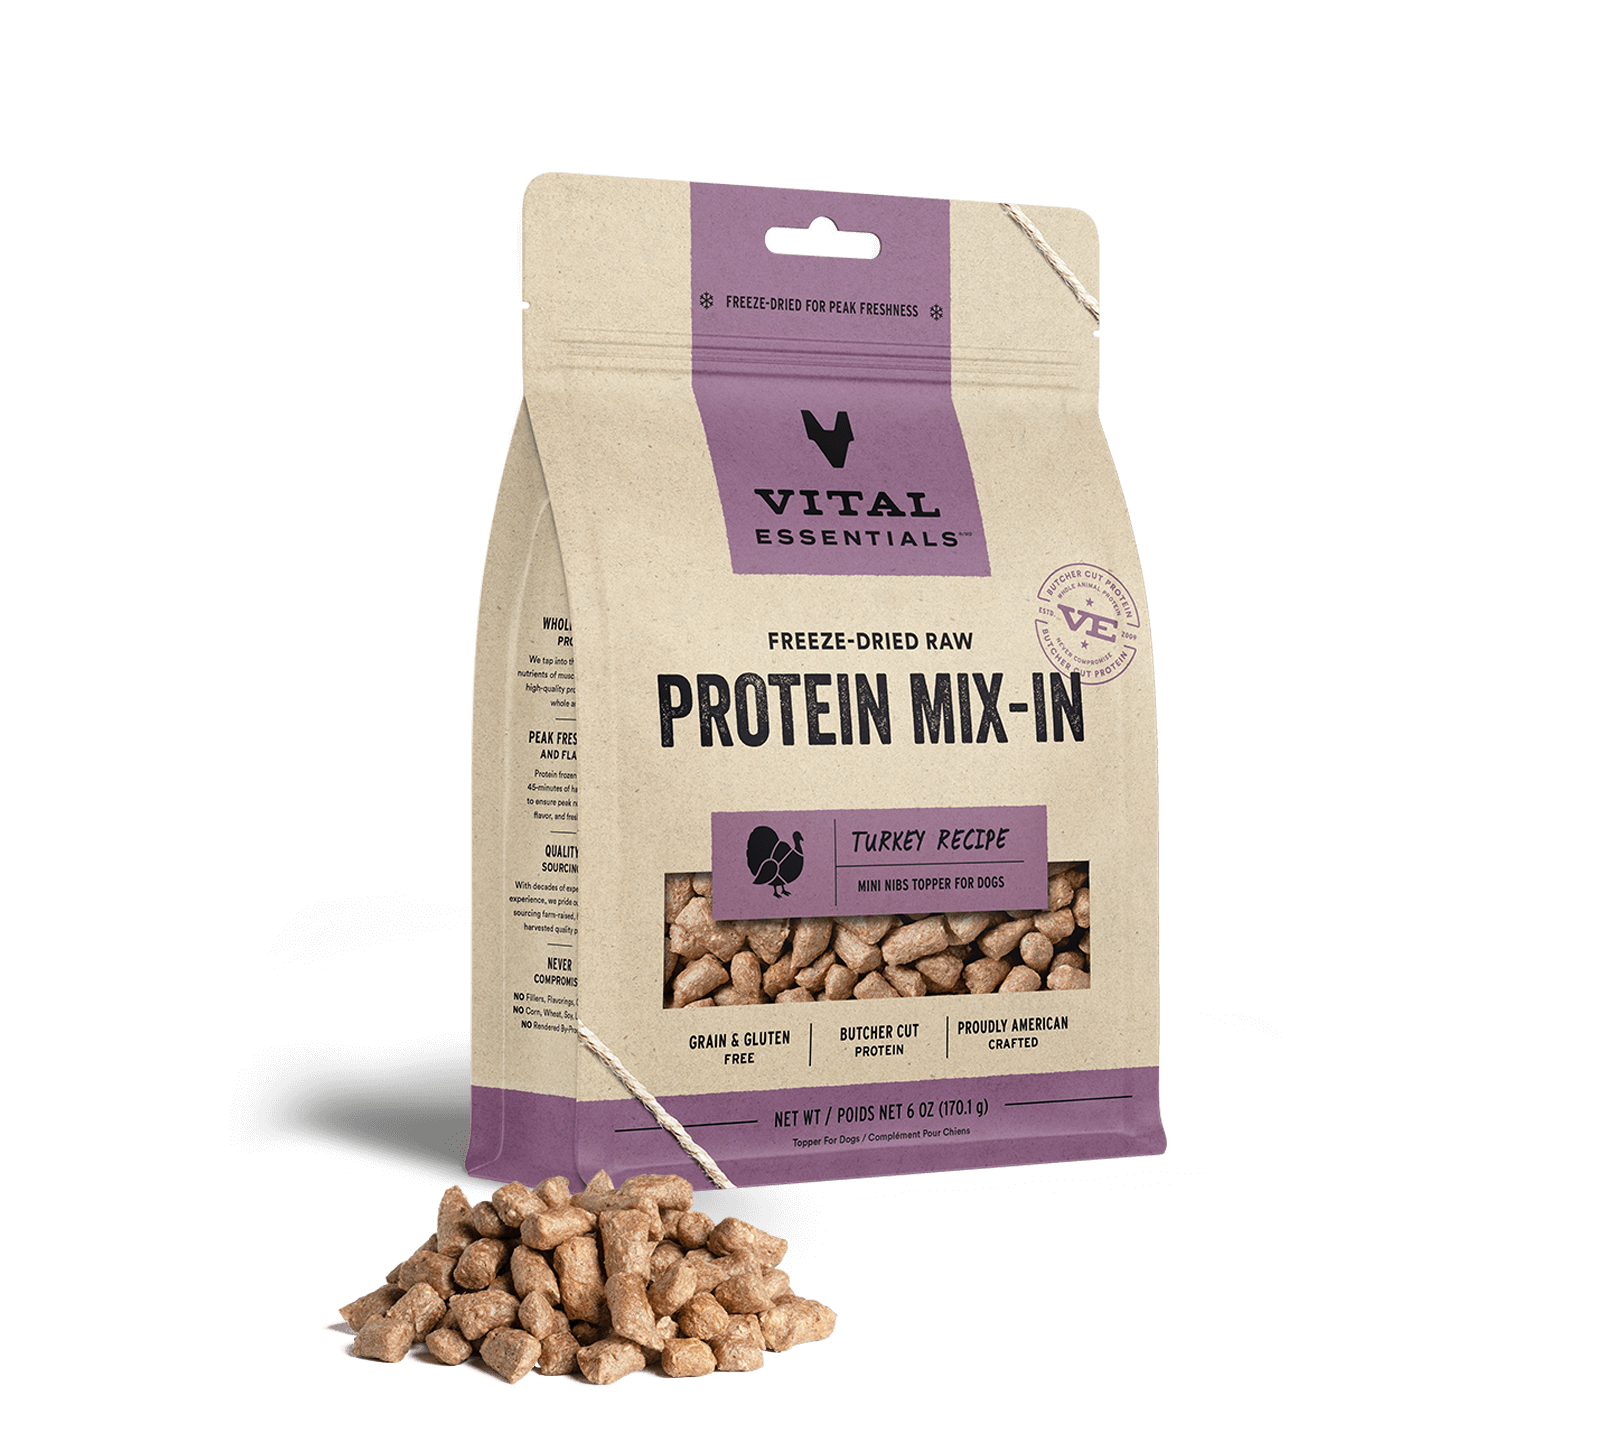 Vital Essentials Freeze-Dried Raw Protein Mix-In Turkey Recipe Mini Nibs Topper for Dogs, 6 oz - Healing/First Aid